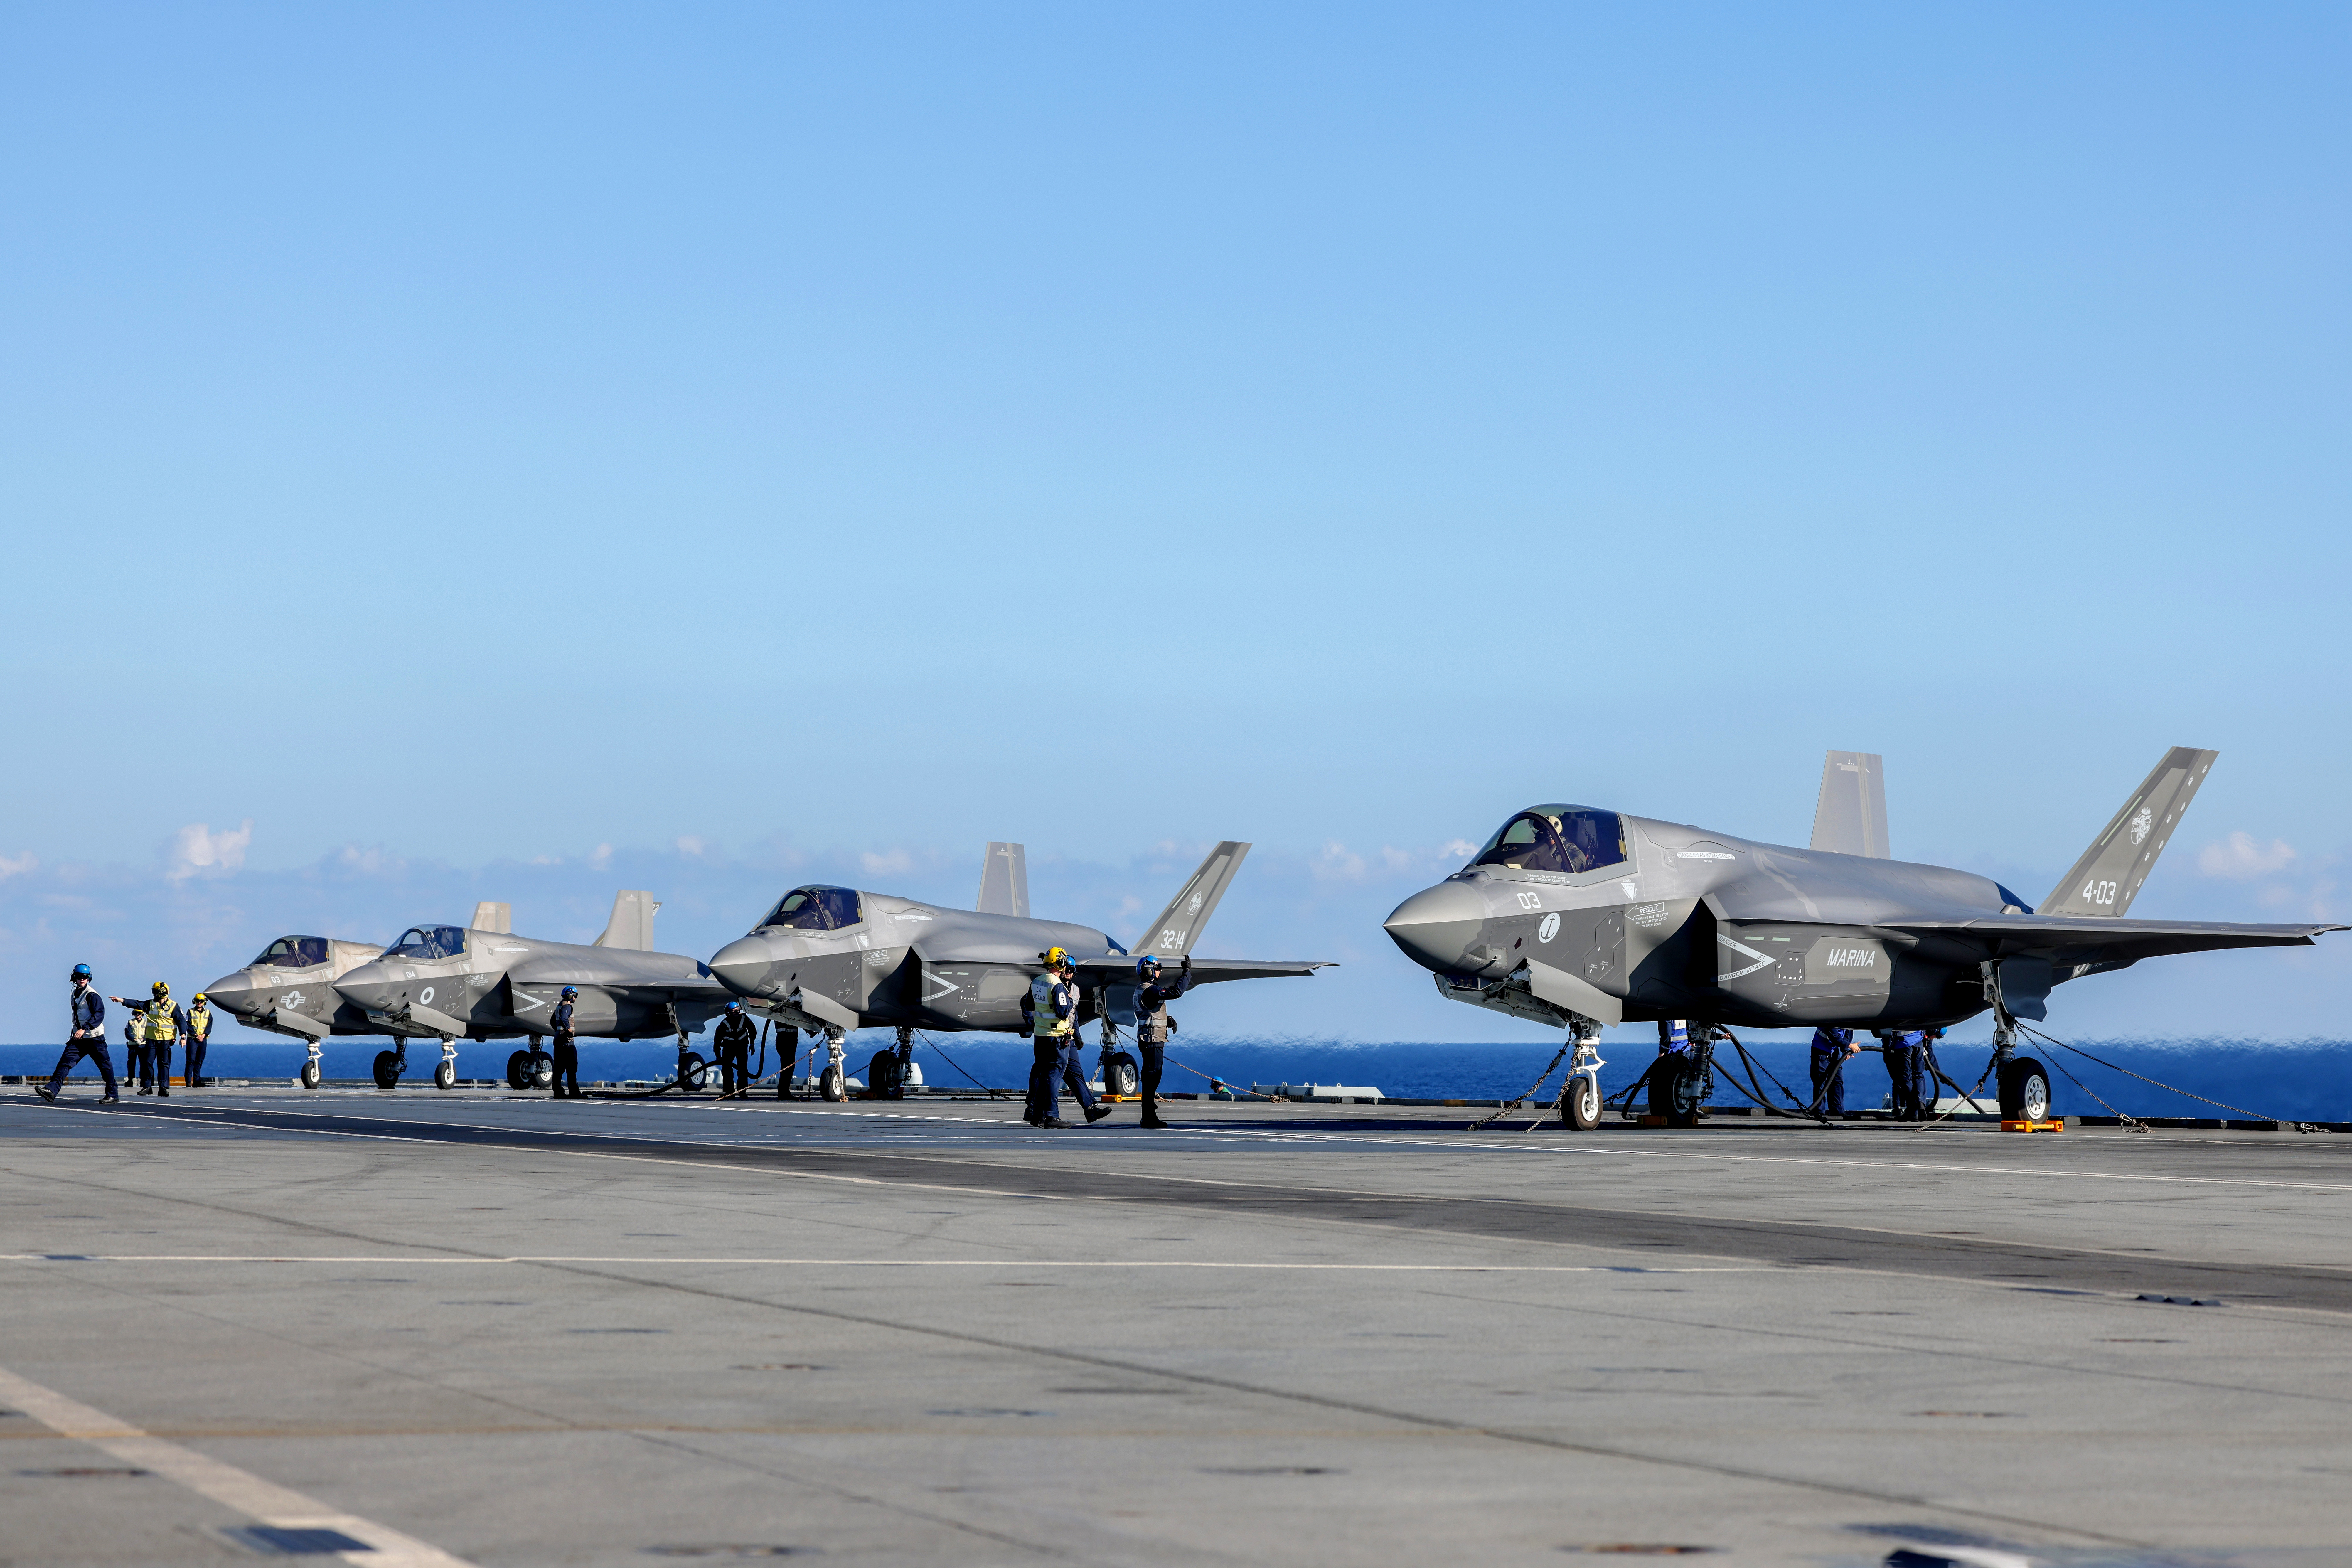 Aircraft lined up on the carrier.